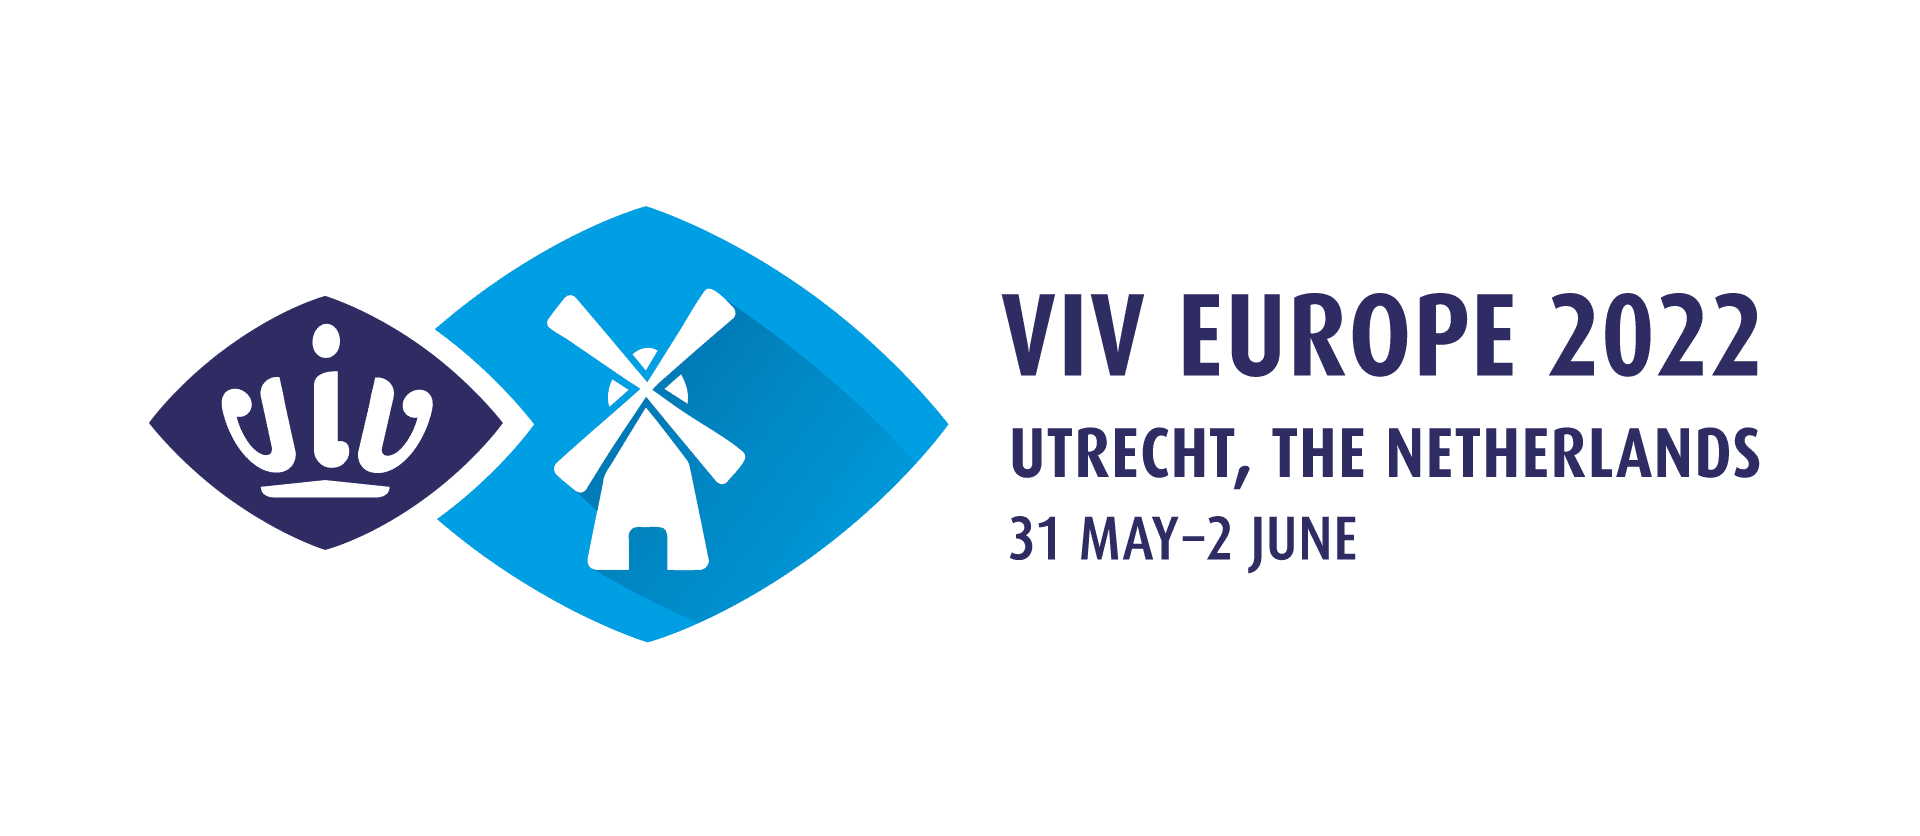 Visit us for free at the VIV Europe in Utrecht, Holland!